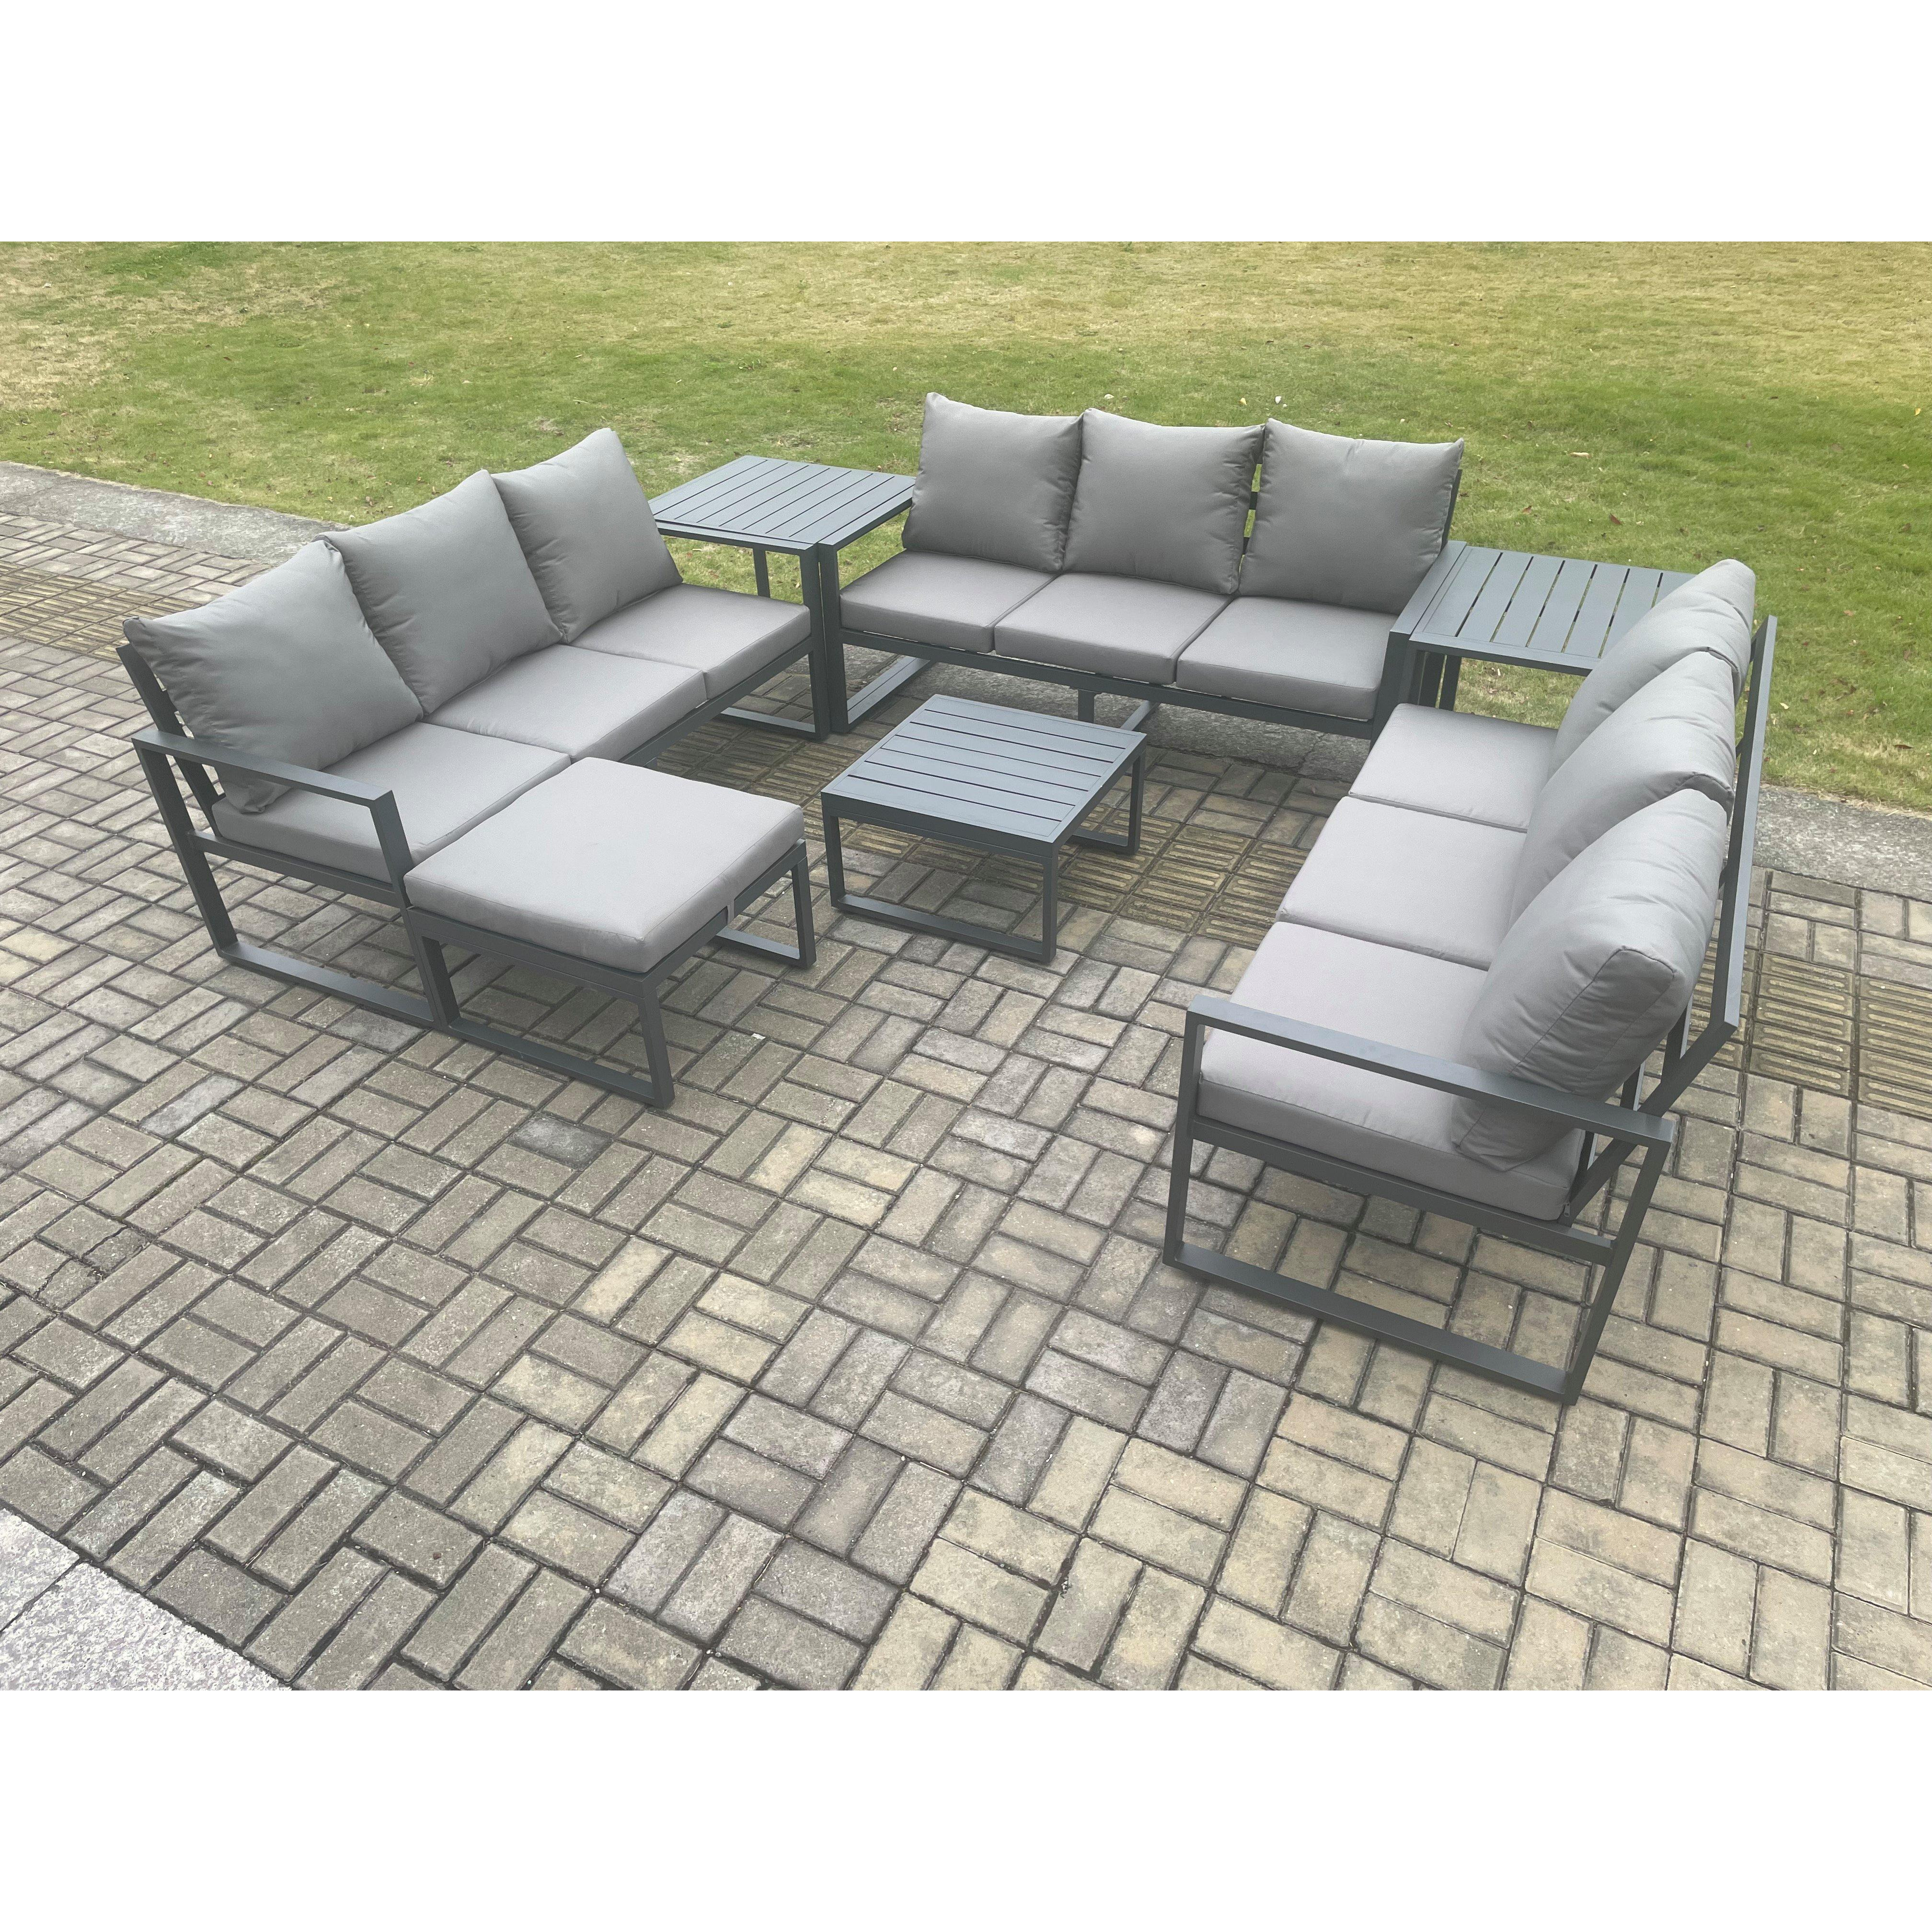 Aluminium 10 Seater Outdoor Garden Furniture Set Patio Lounge Sofa with Coffee Table 2 Side Tables Big Footstool Conservatory Set - image 1